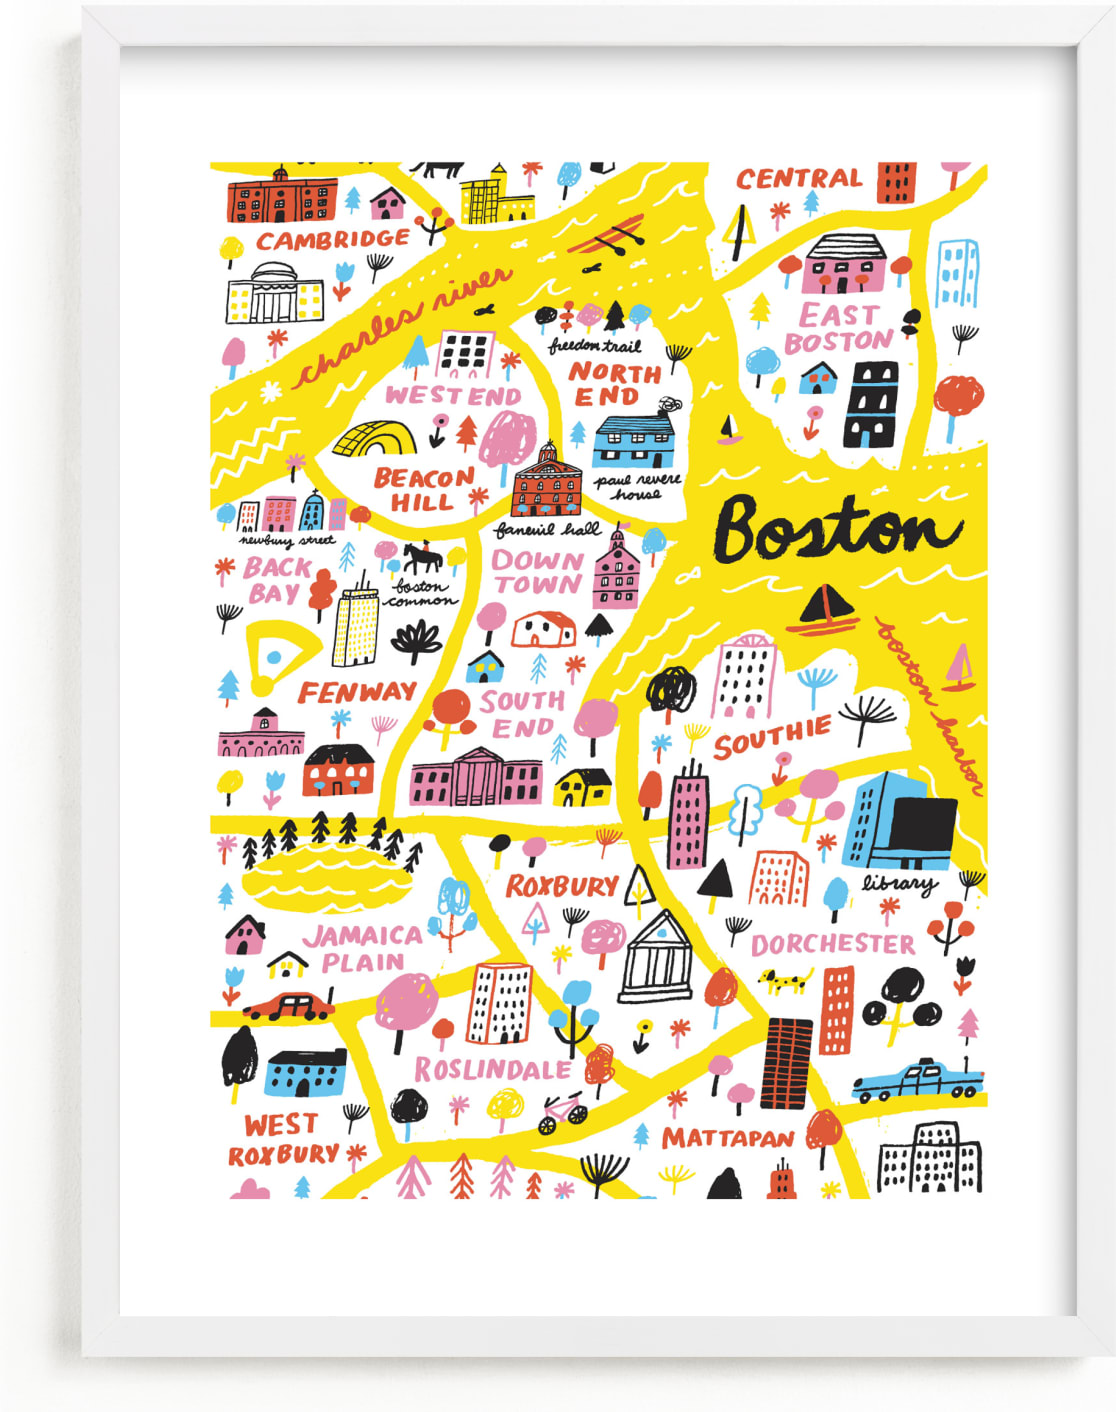 This is a yellow art by Jordan Sondler called I Love Boston.